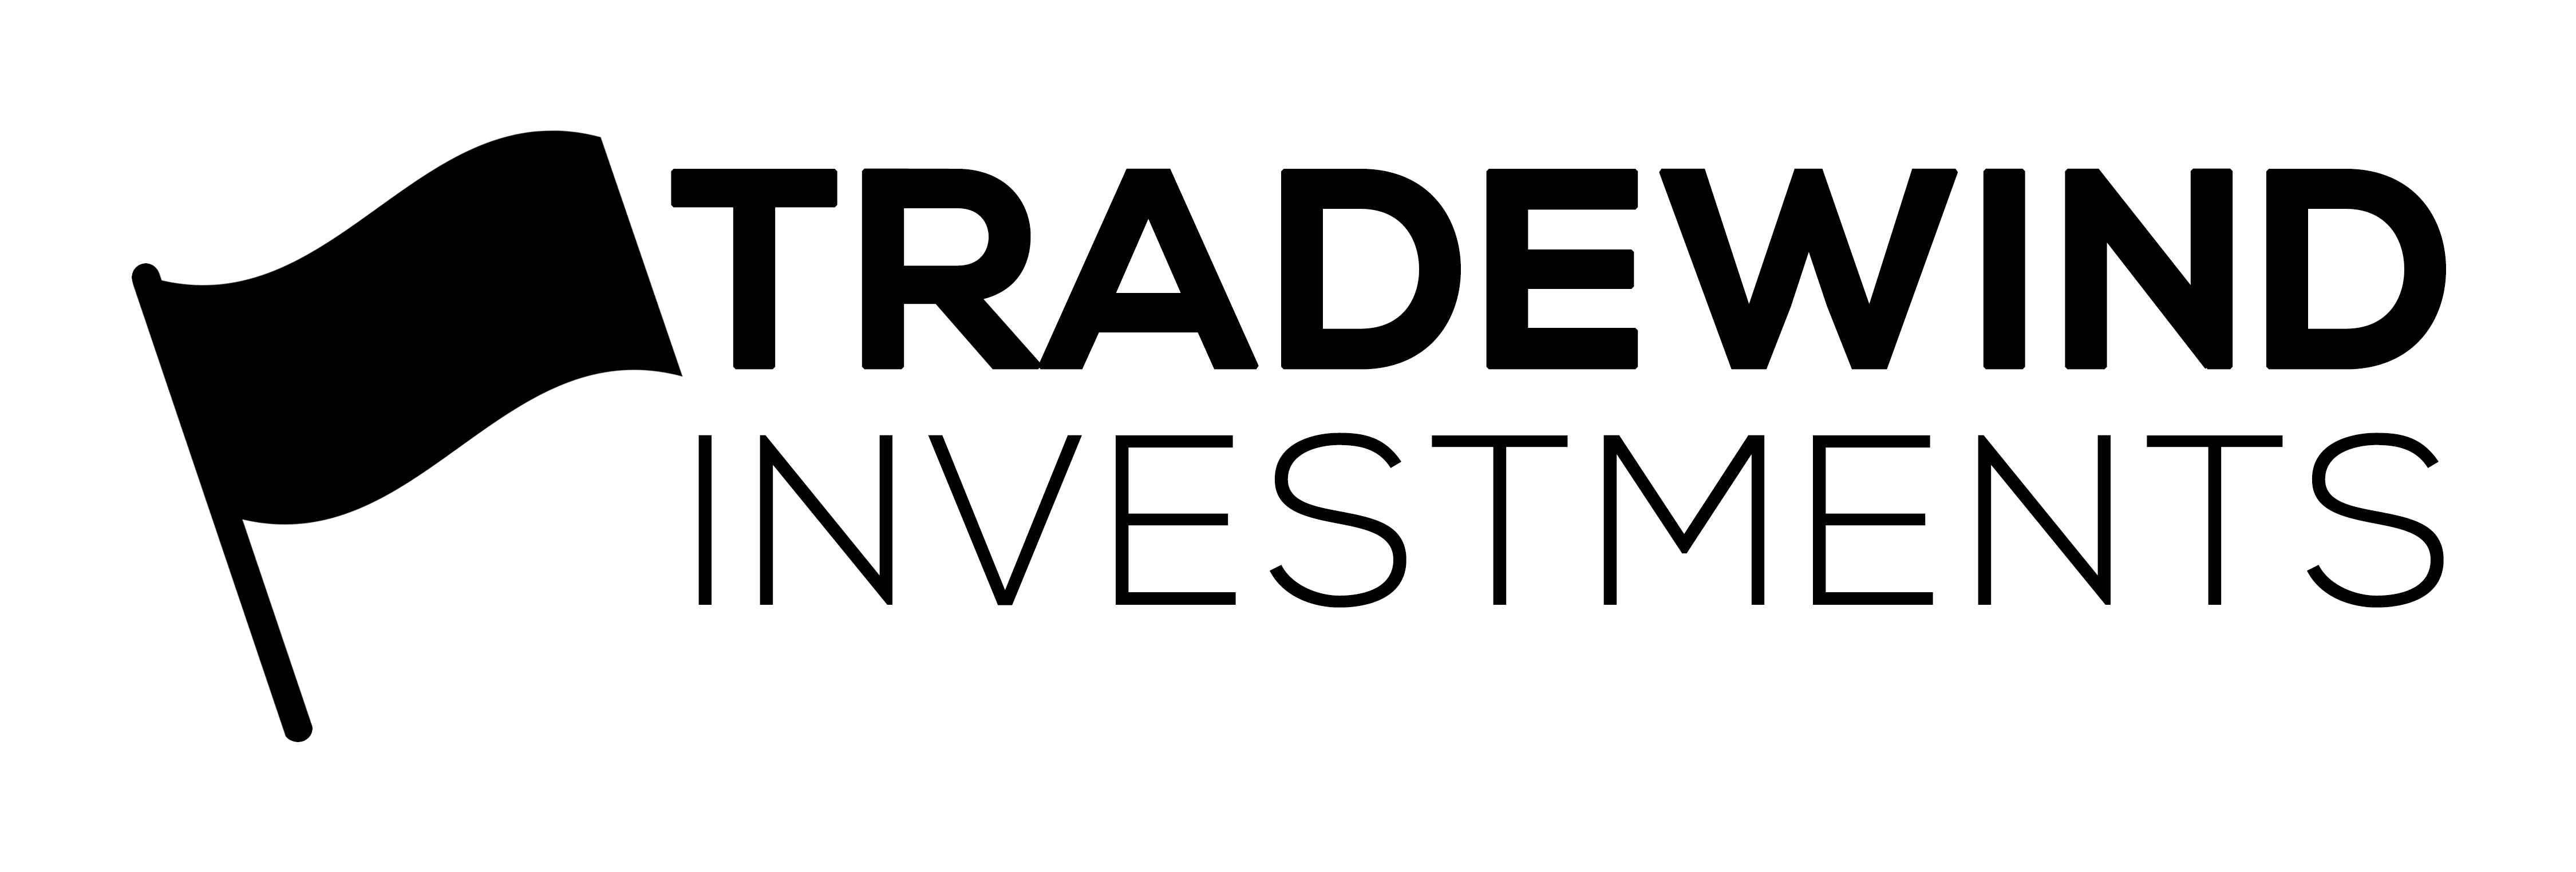 Tradewind Investment and Property Management logo